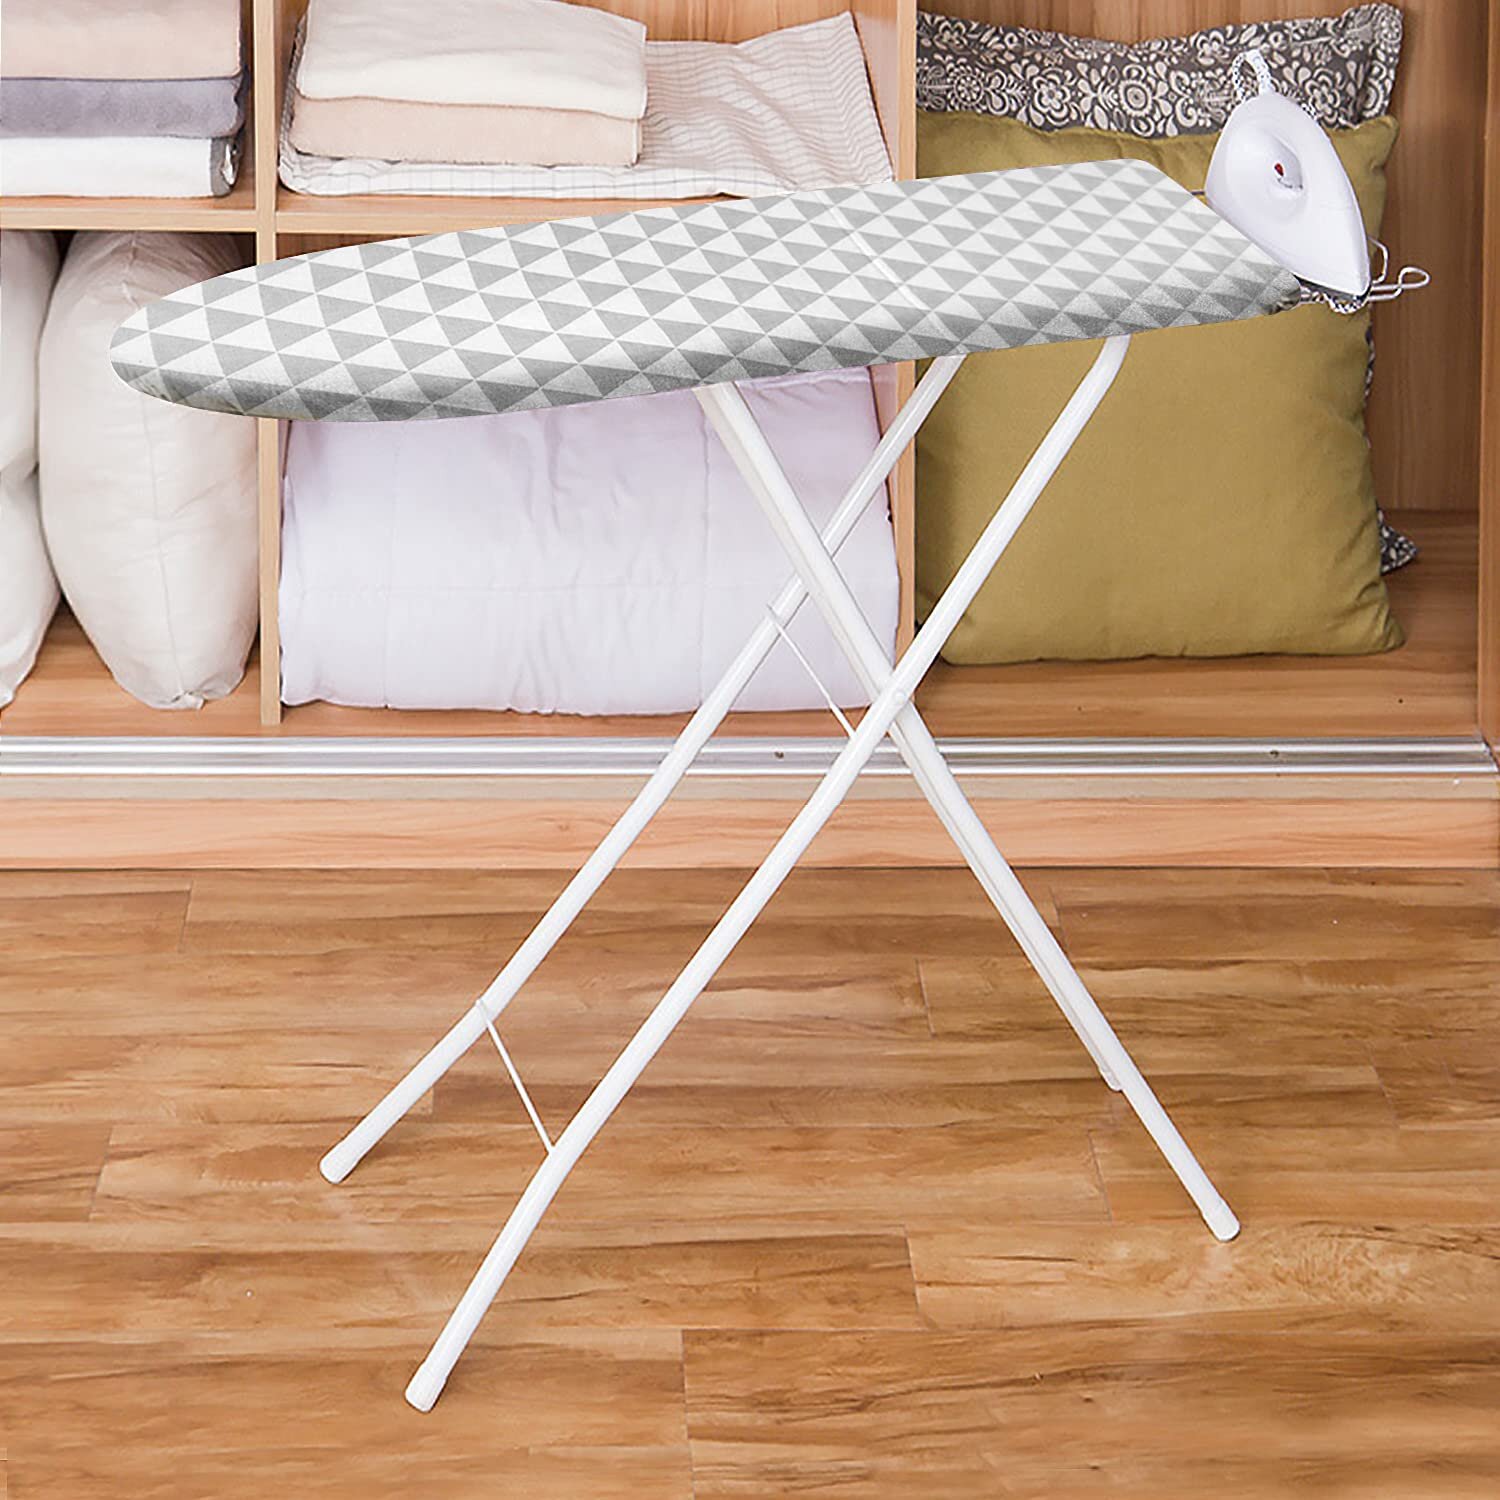 Ironing Board Cover and Pad Silicone Coated Scorch and Stain Resistant 